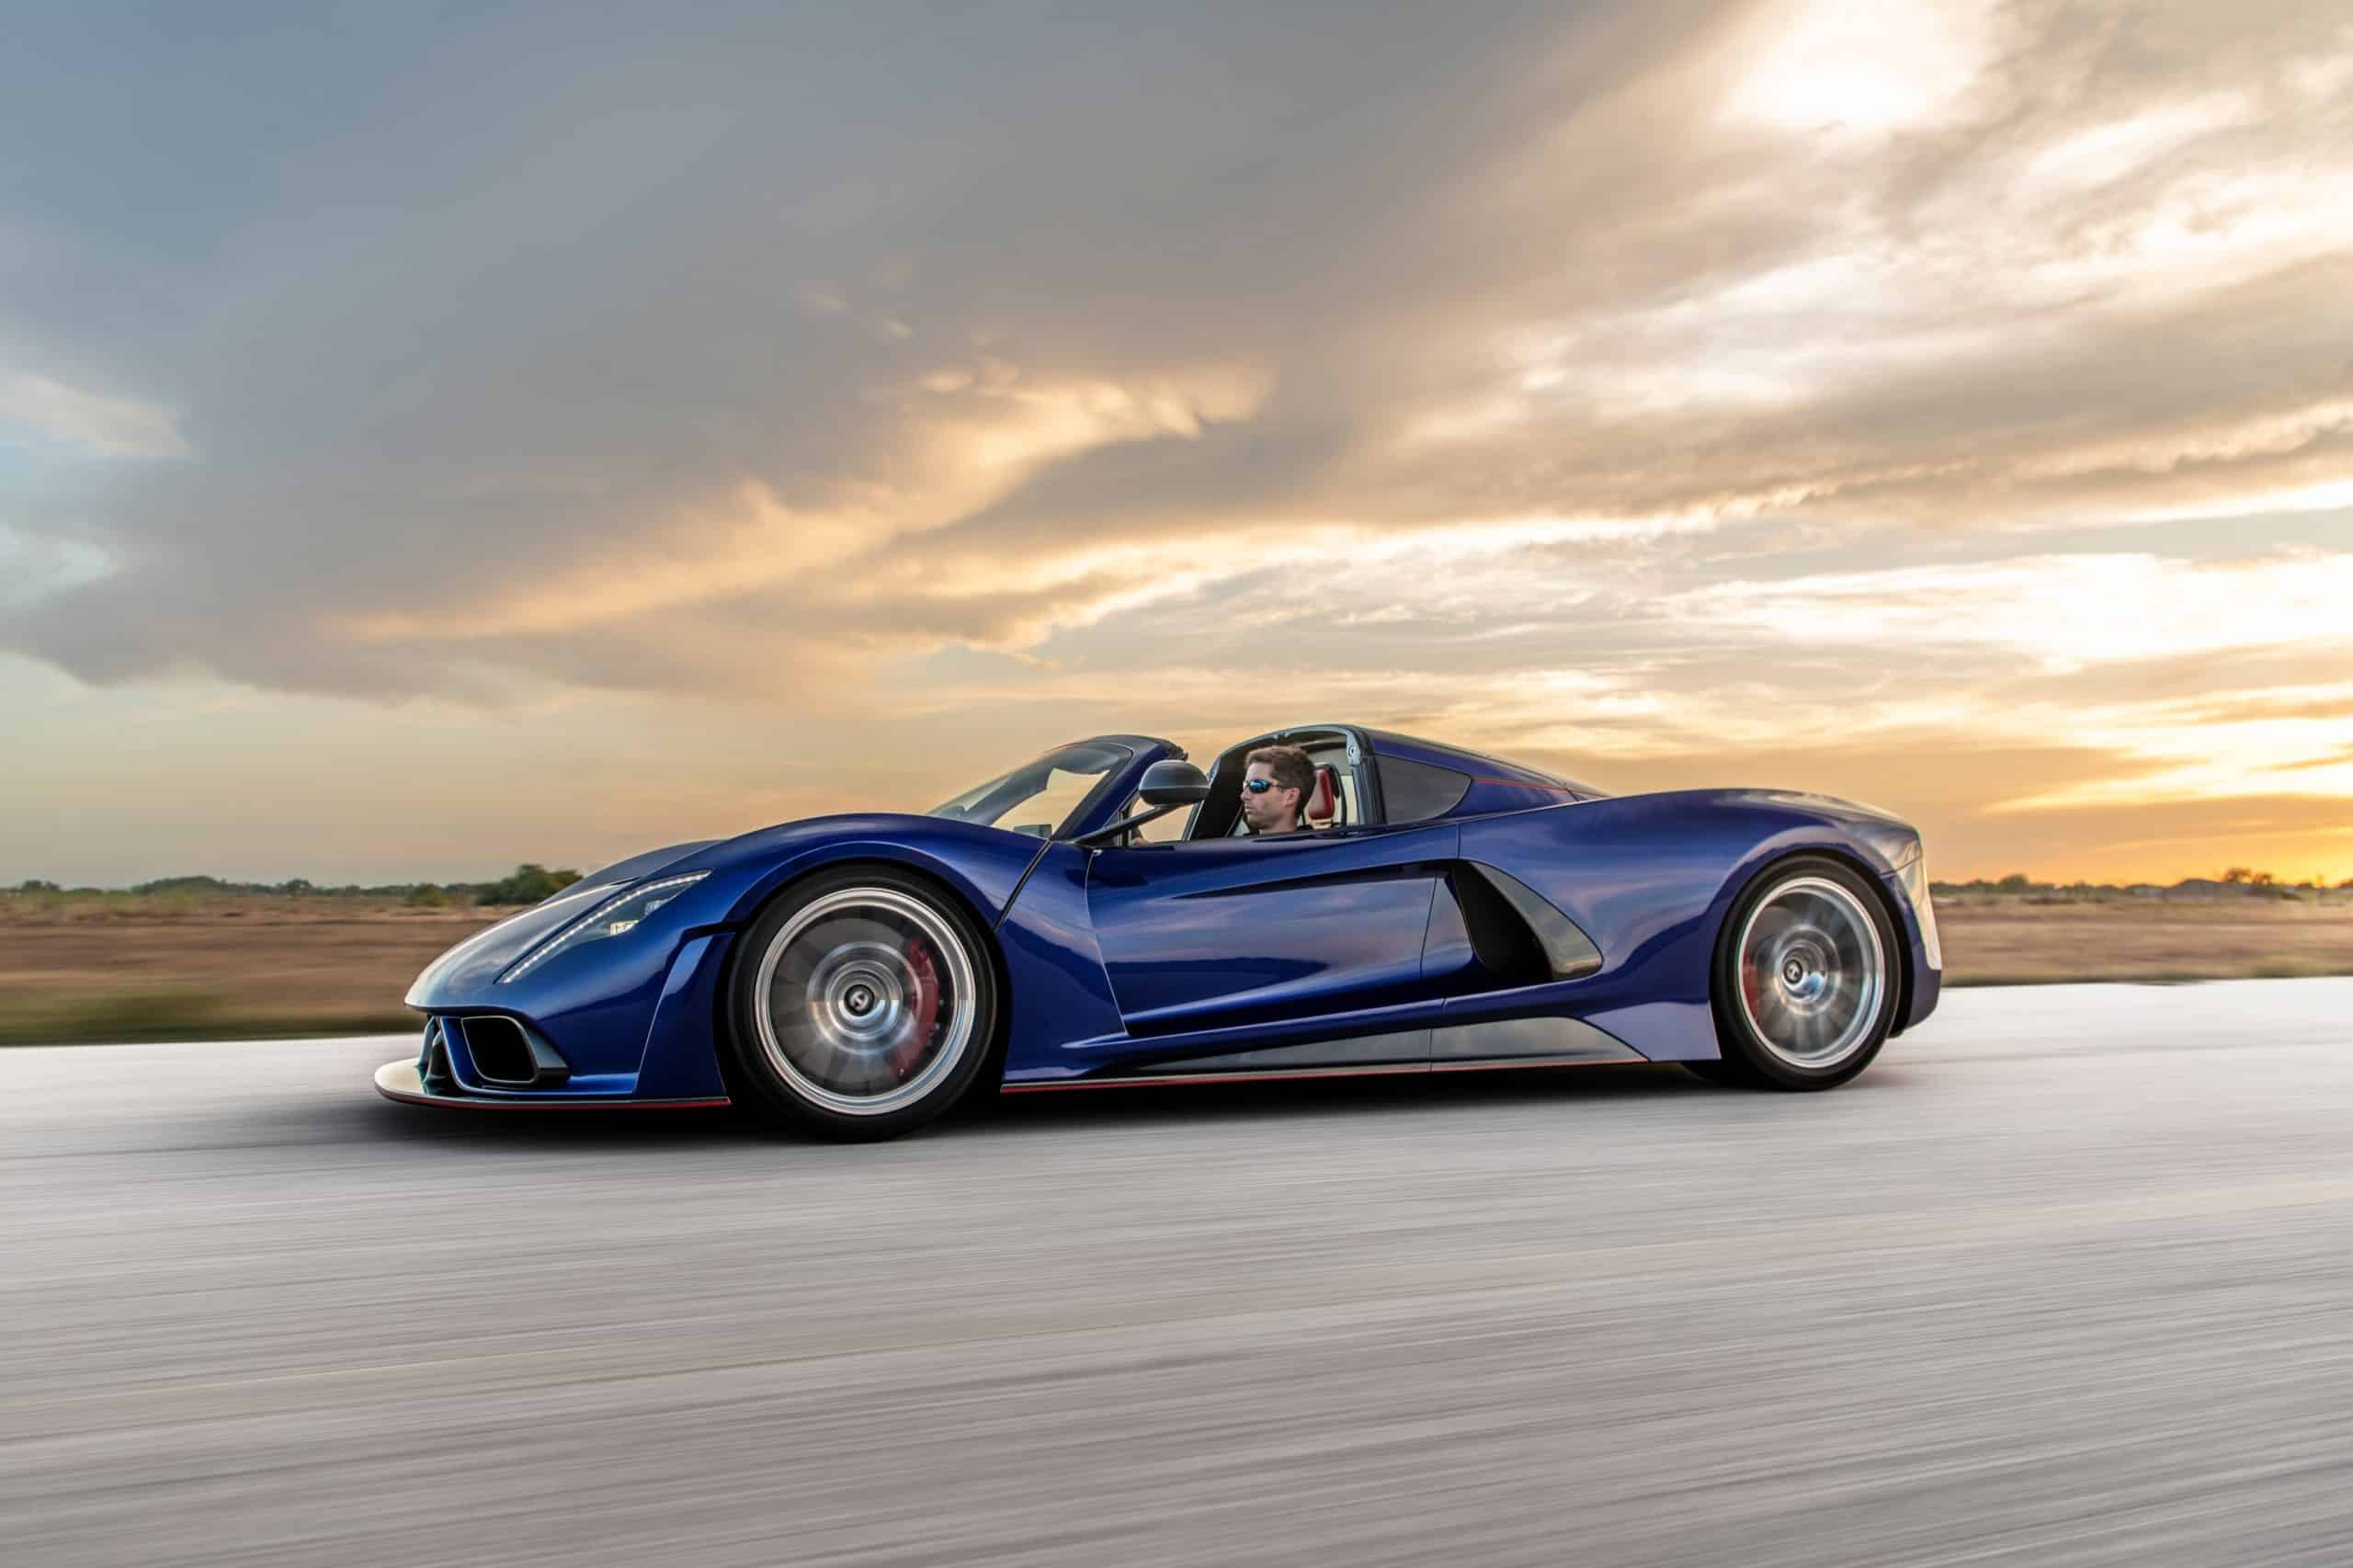 Venom F5 sold out, Hennessey planning something 'out of this world